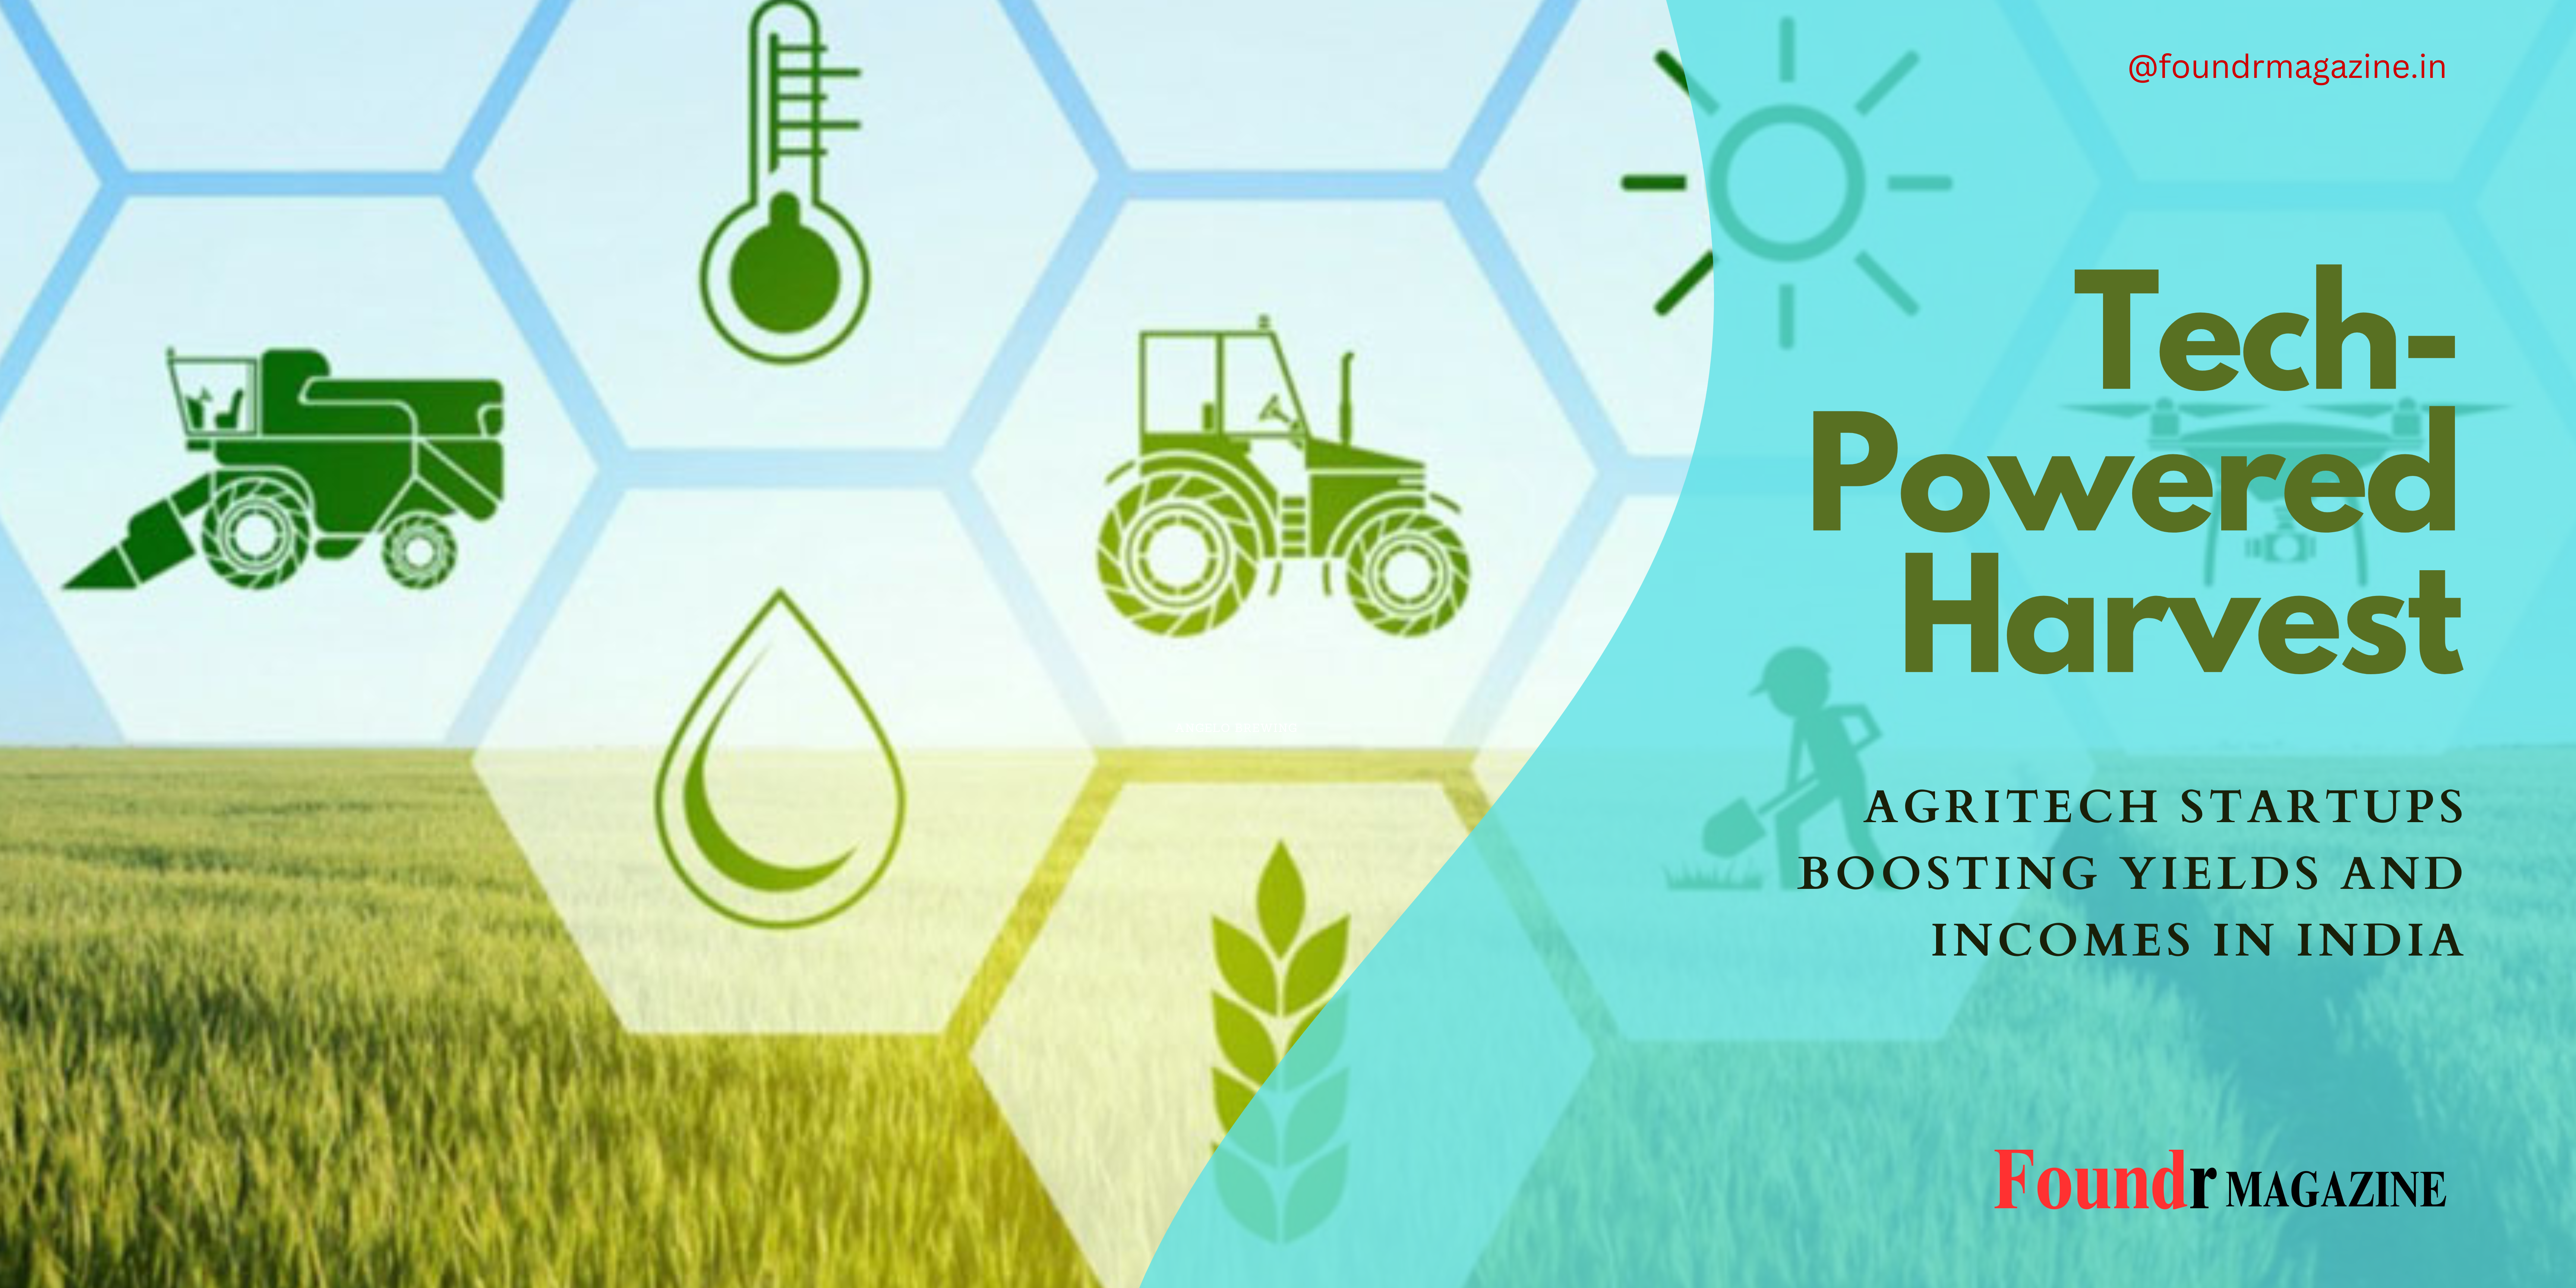 Article | Agritech Startups Boosting Yields and Incomes in India